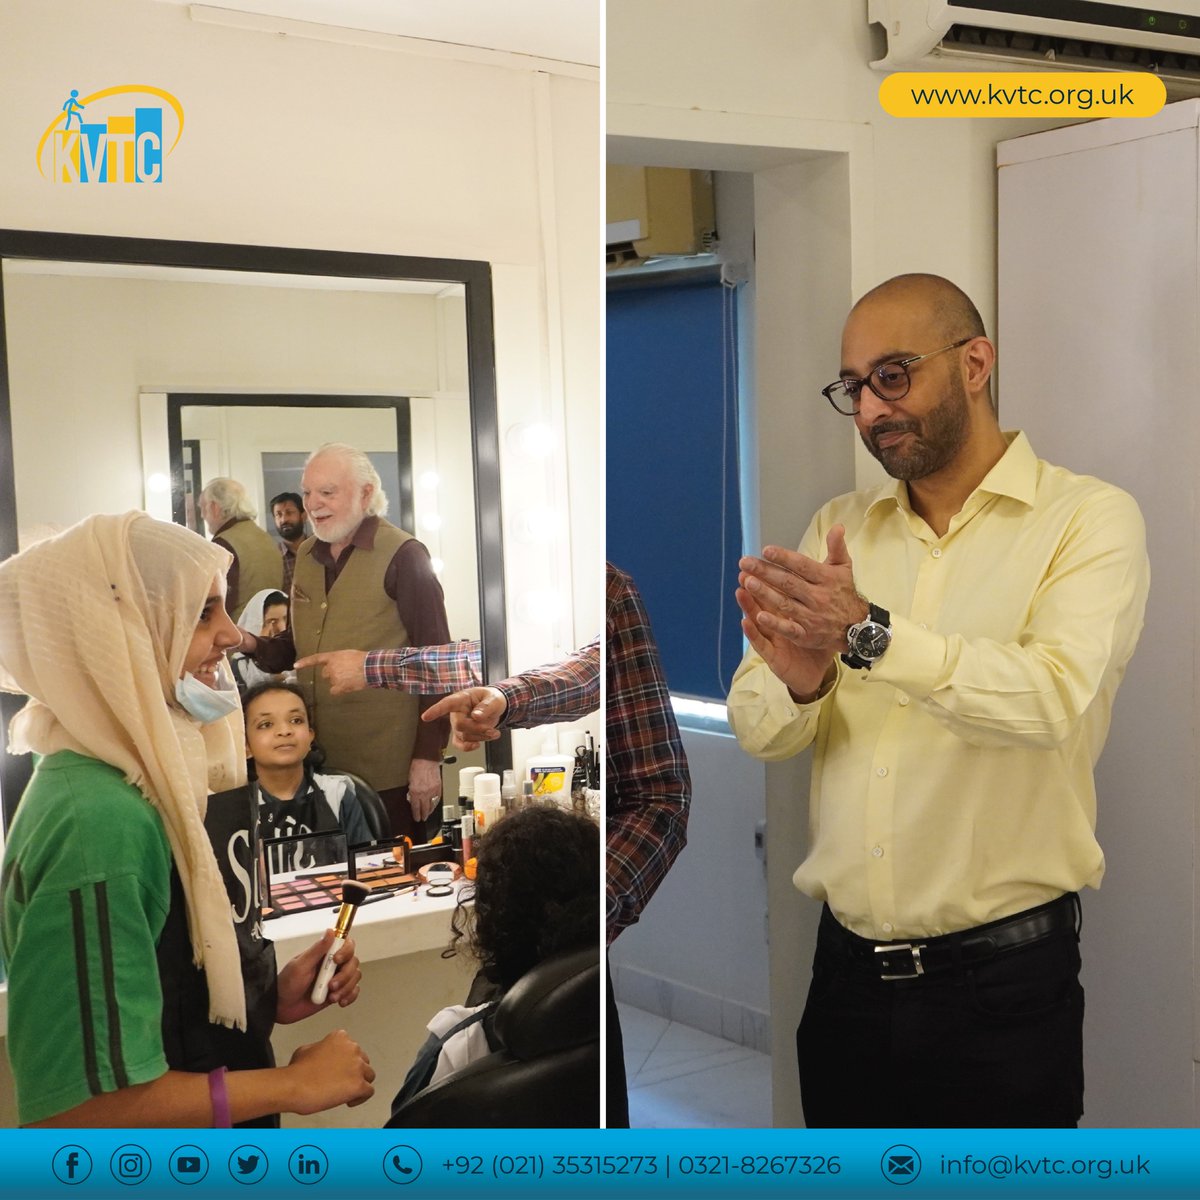 Mr. Zain Bashir, Vice Chairman at @gulahmedfashion visited KVTC and praised the fully-equipped facilities provided at the Centre. He spent a great time meeting with the students and learning about the therapies and skills training the differently abled receive at the Centre.